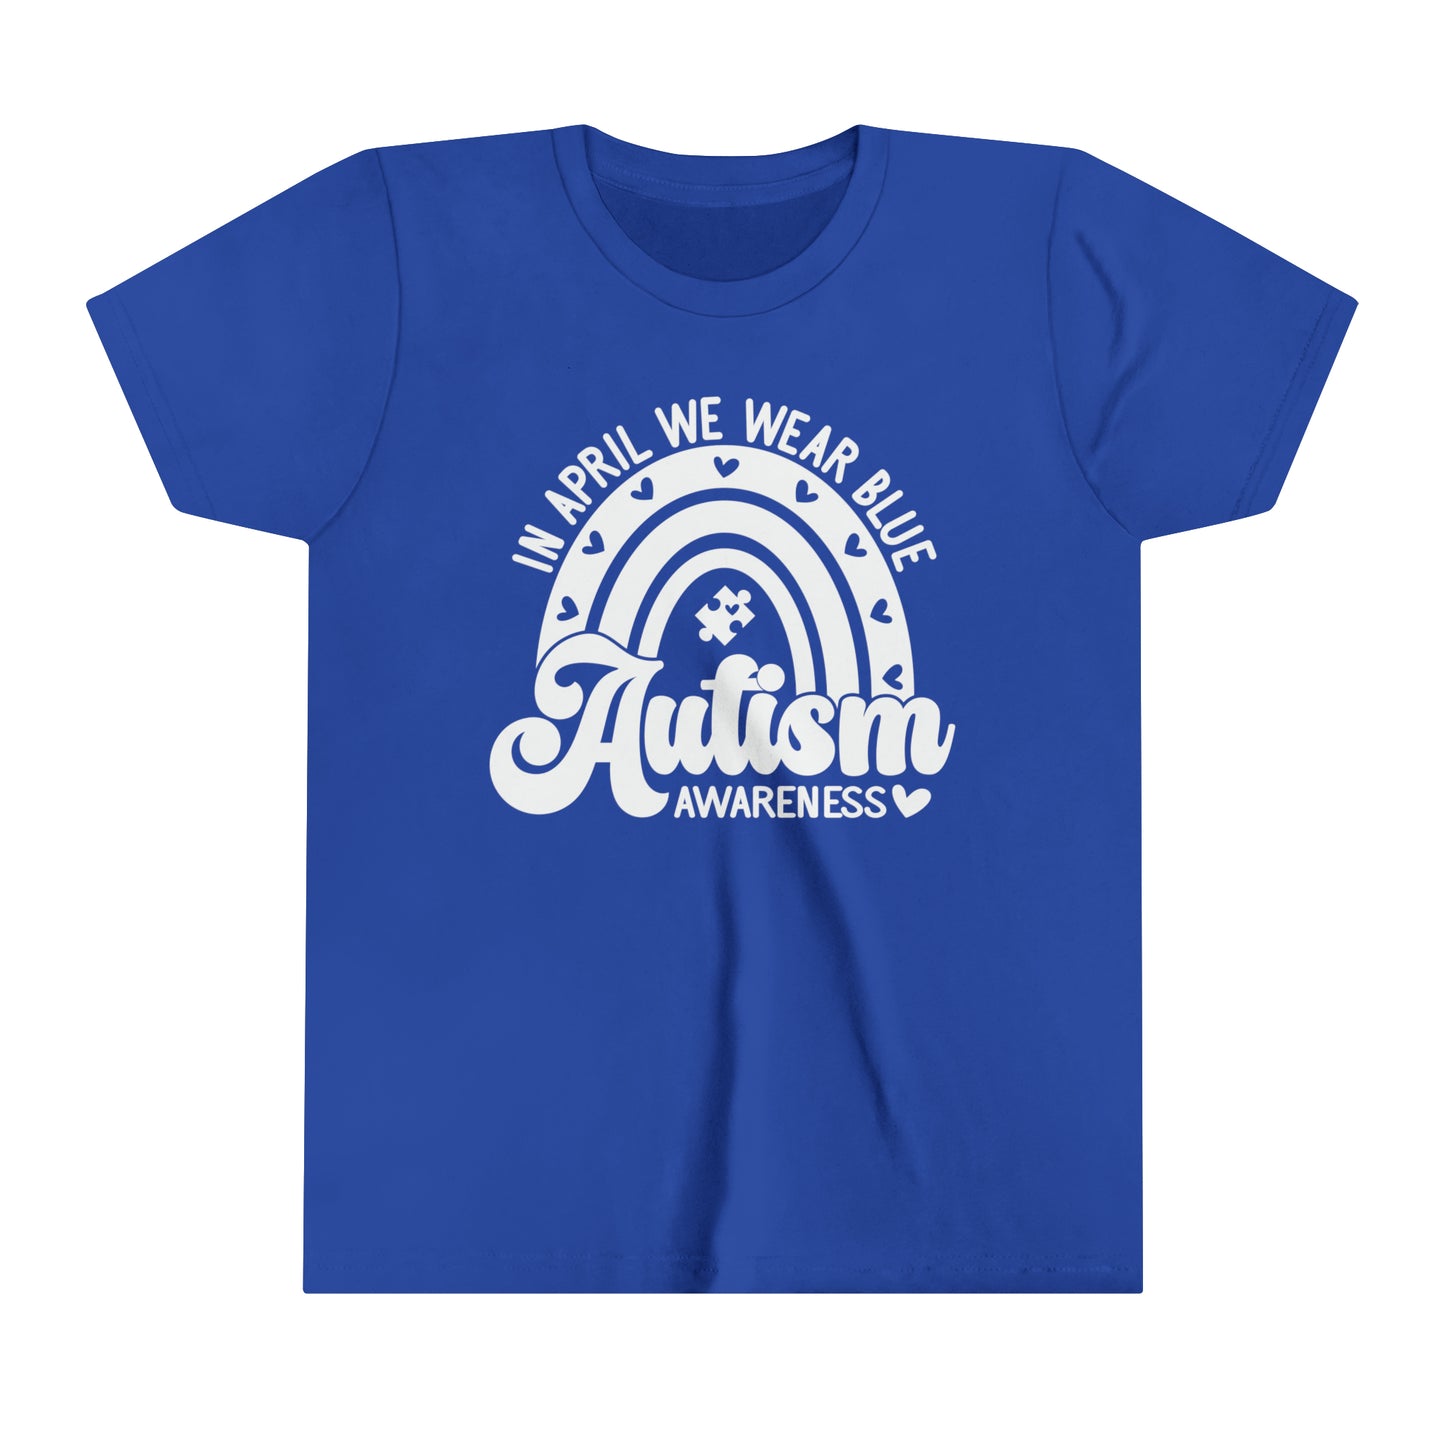 In April We Wear Blue Autism Advocate Awareness Youth Shirt